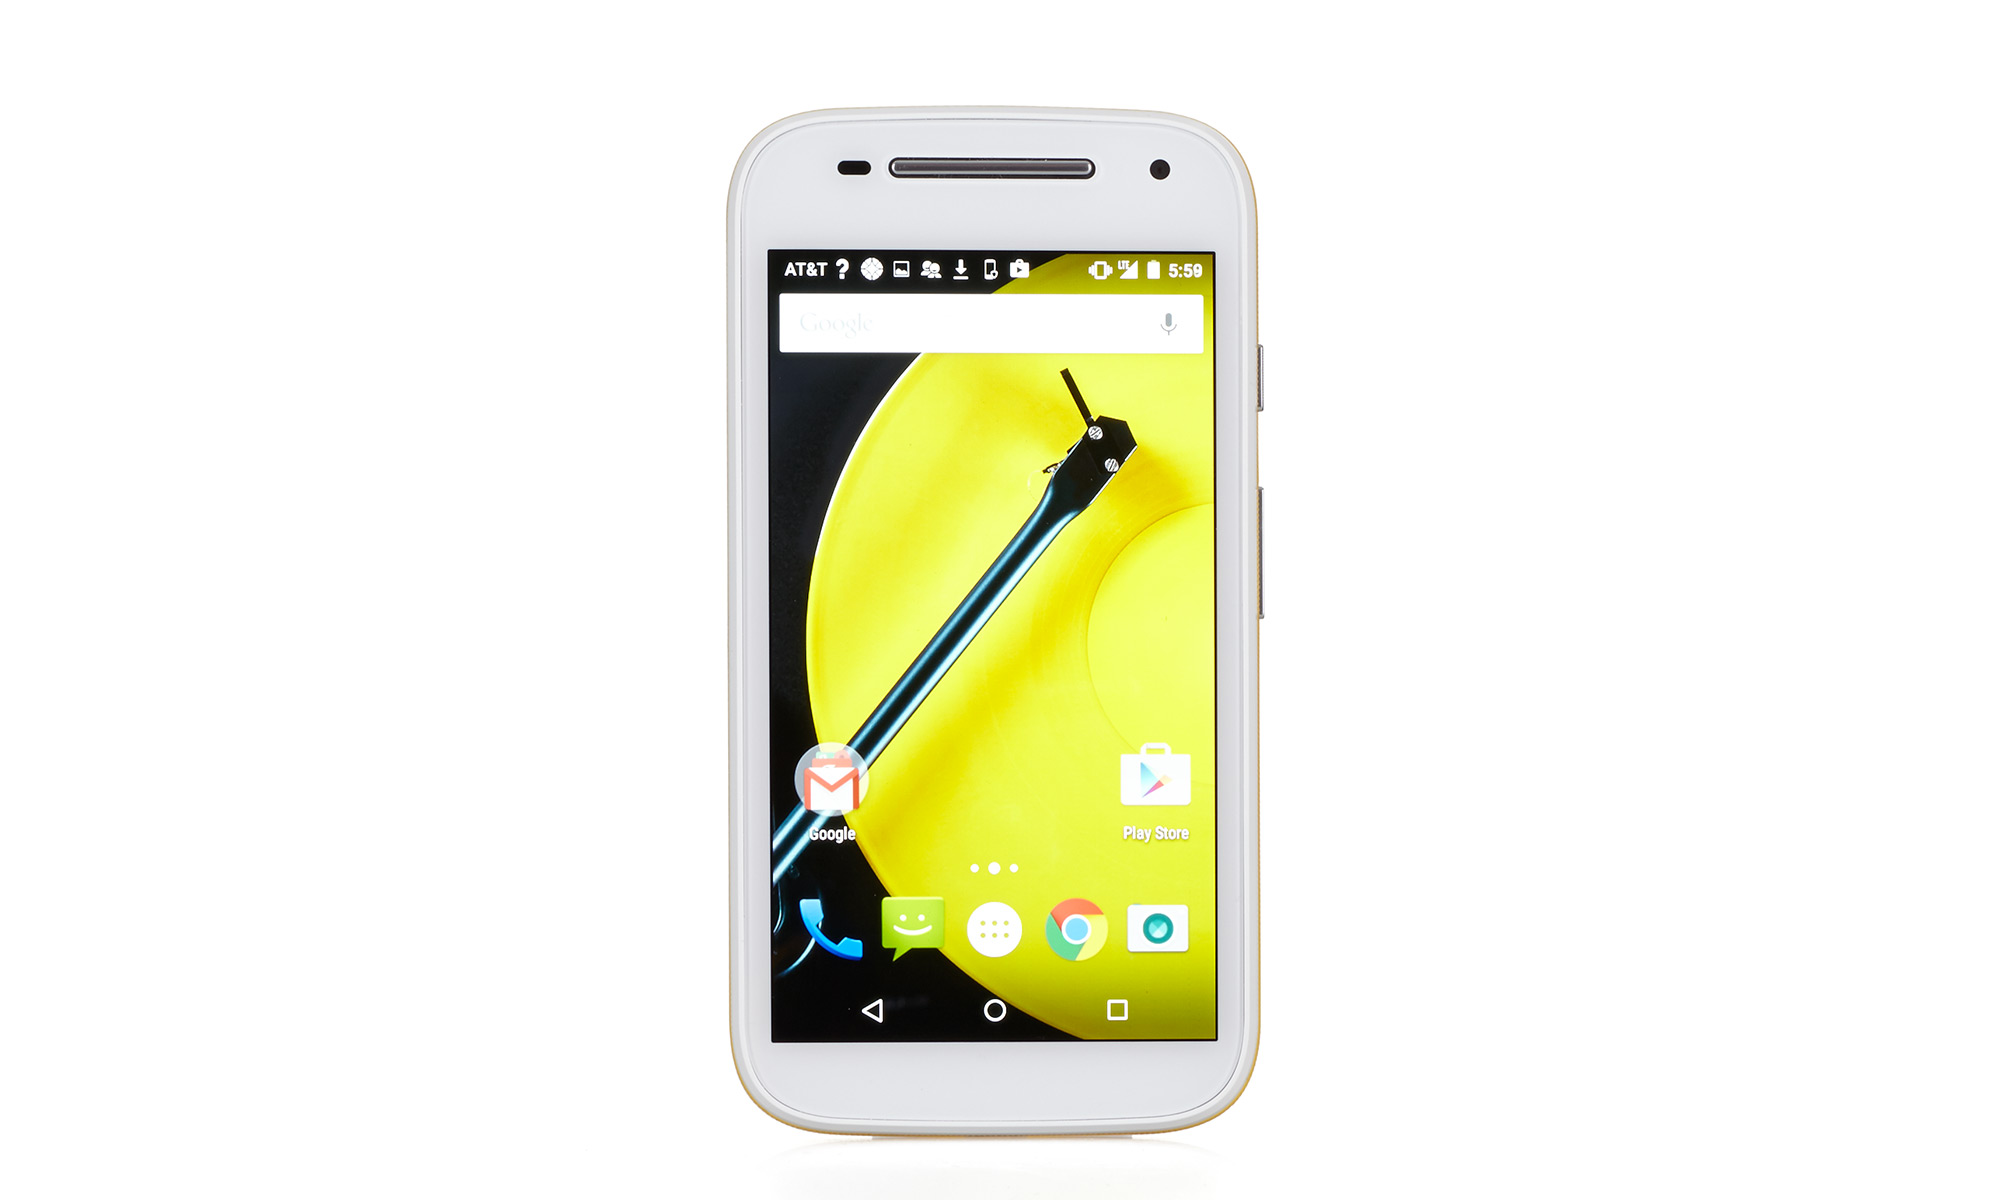 Moto G Play (4th Gen) Smartphone with a Snapdragon 410 processor